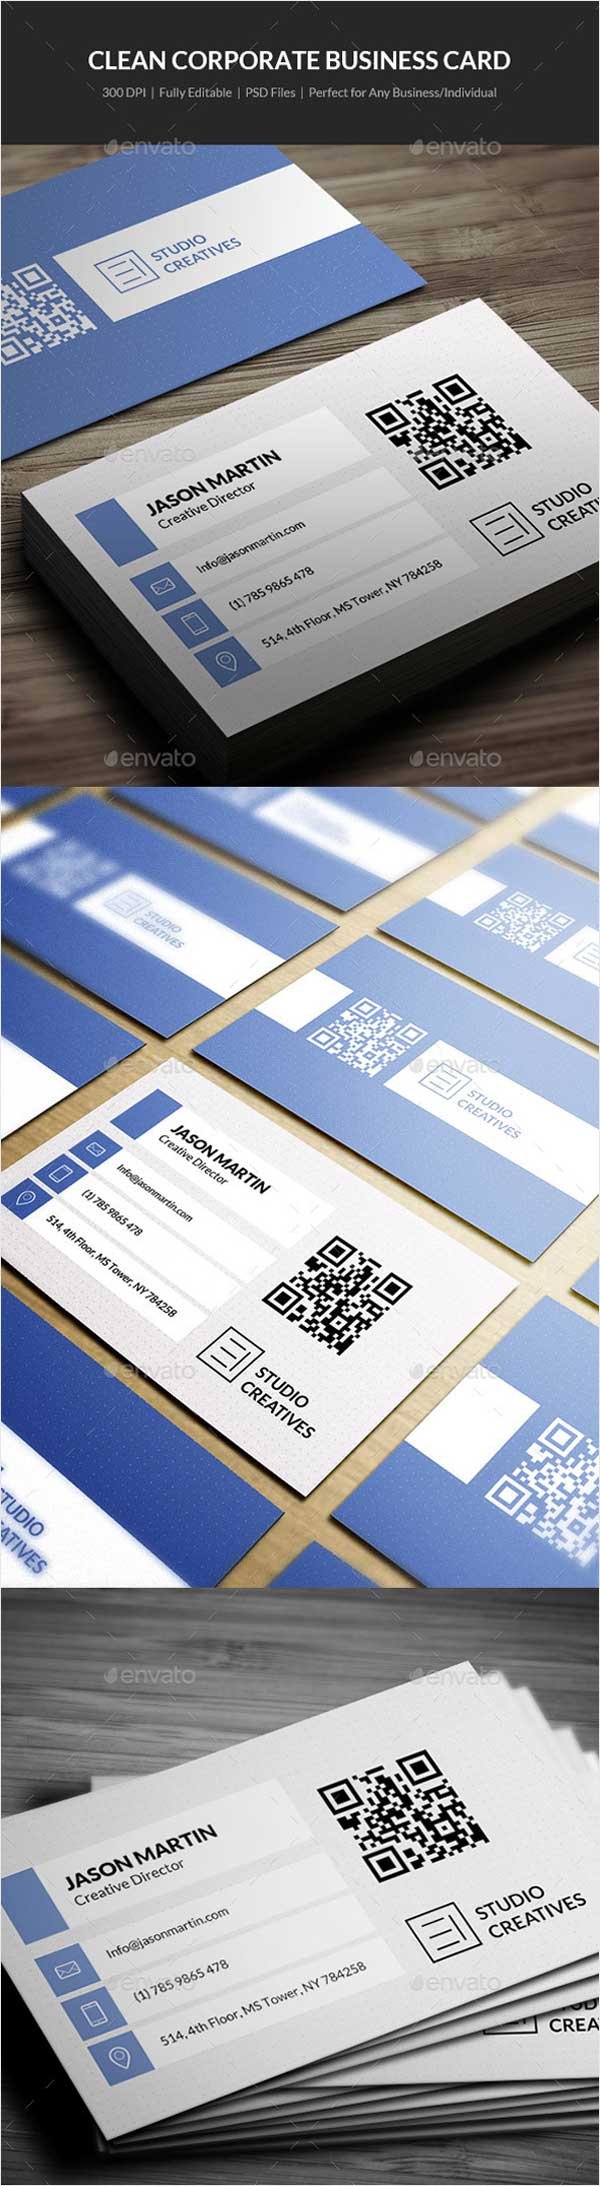 Clean-Corporate-Business-Card